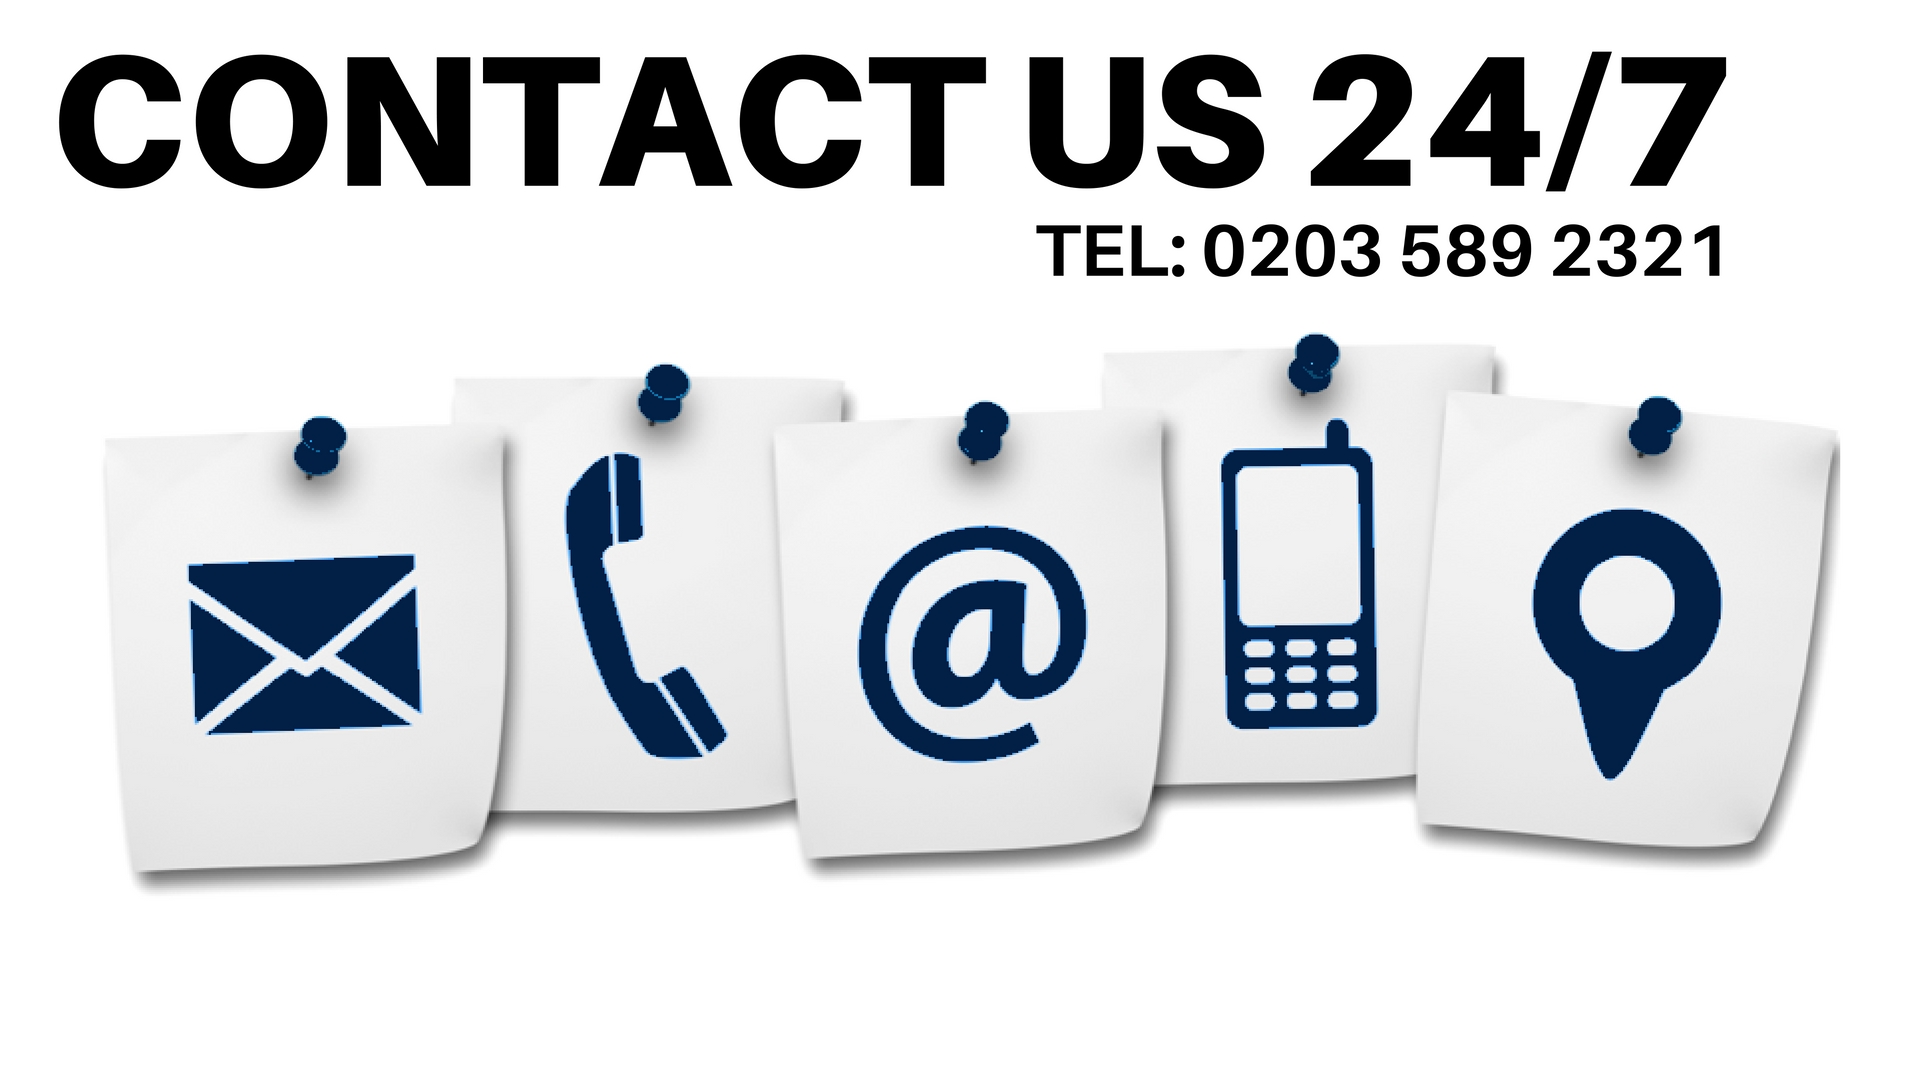 Contact us 24/7